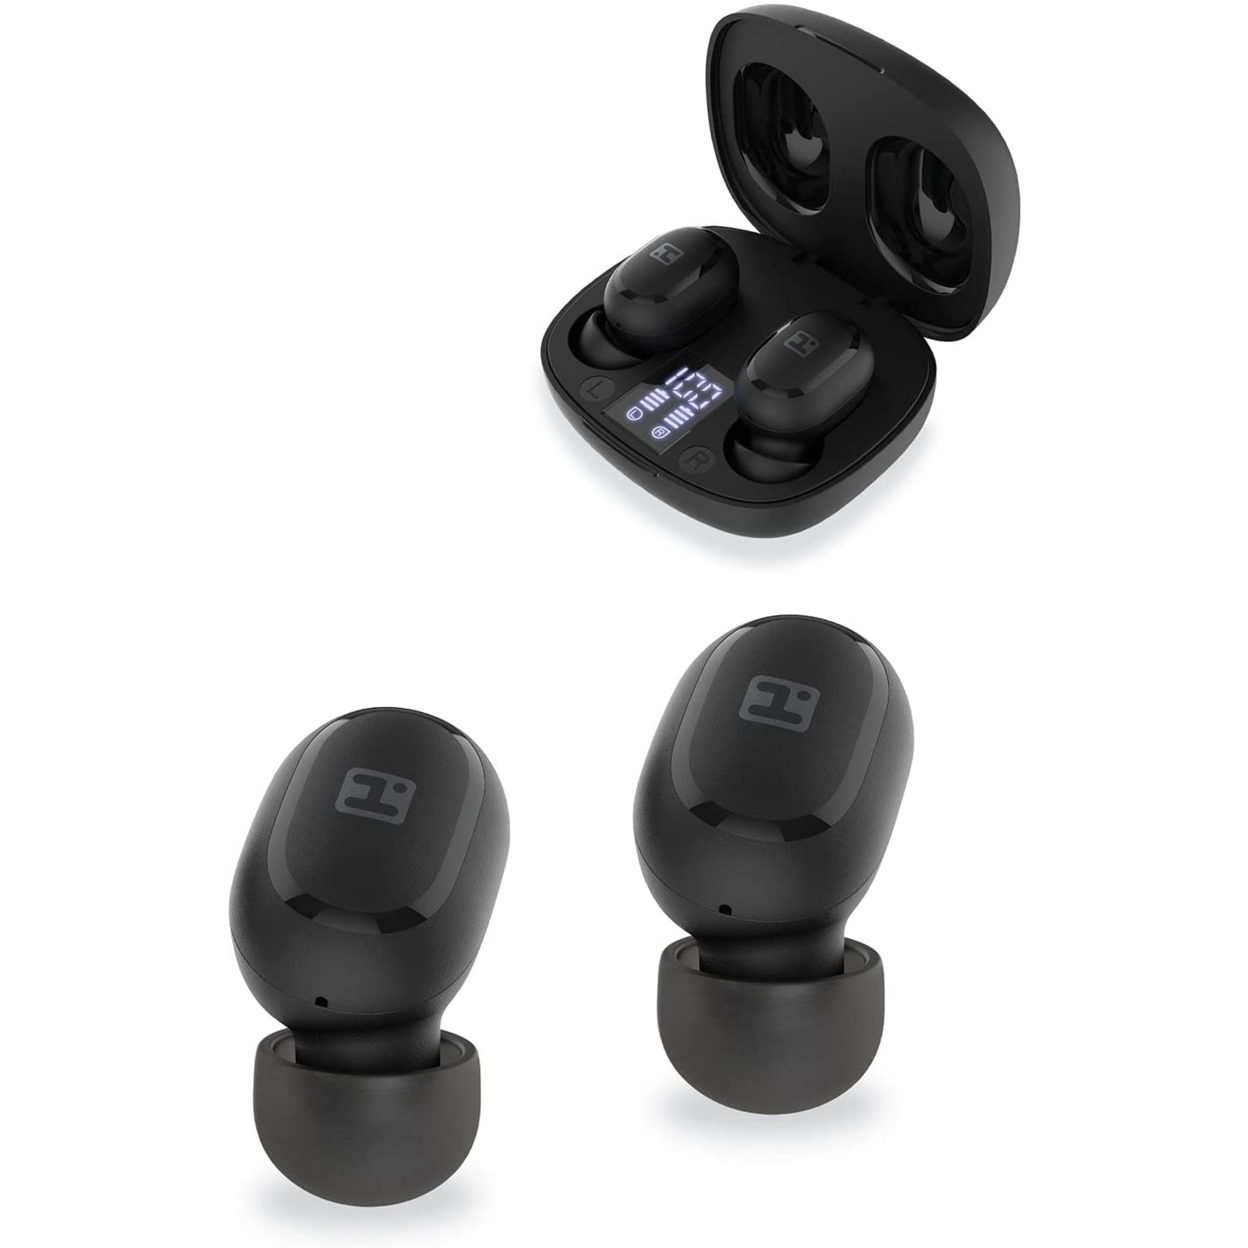 XT-45 Bluetooth Stereo Weather-Proof Earphones With Charging Case And USB Charging Cable (BE-206)